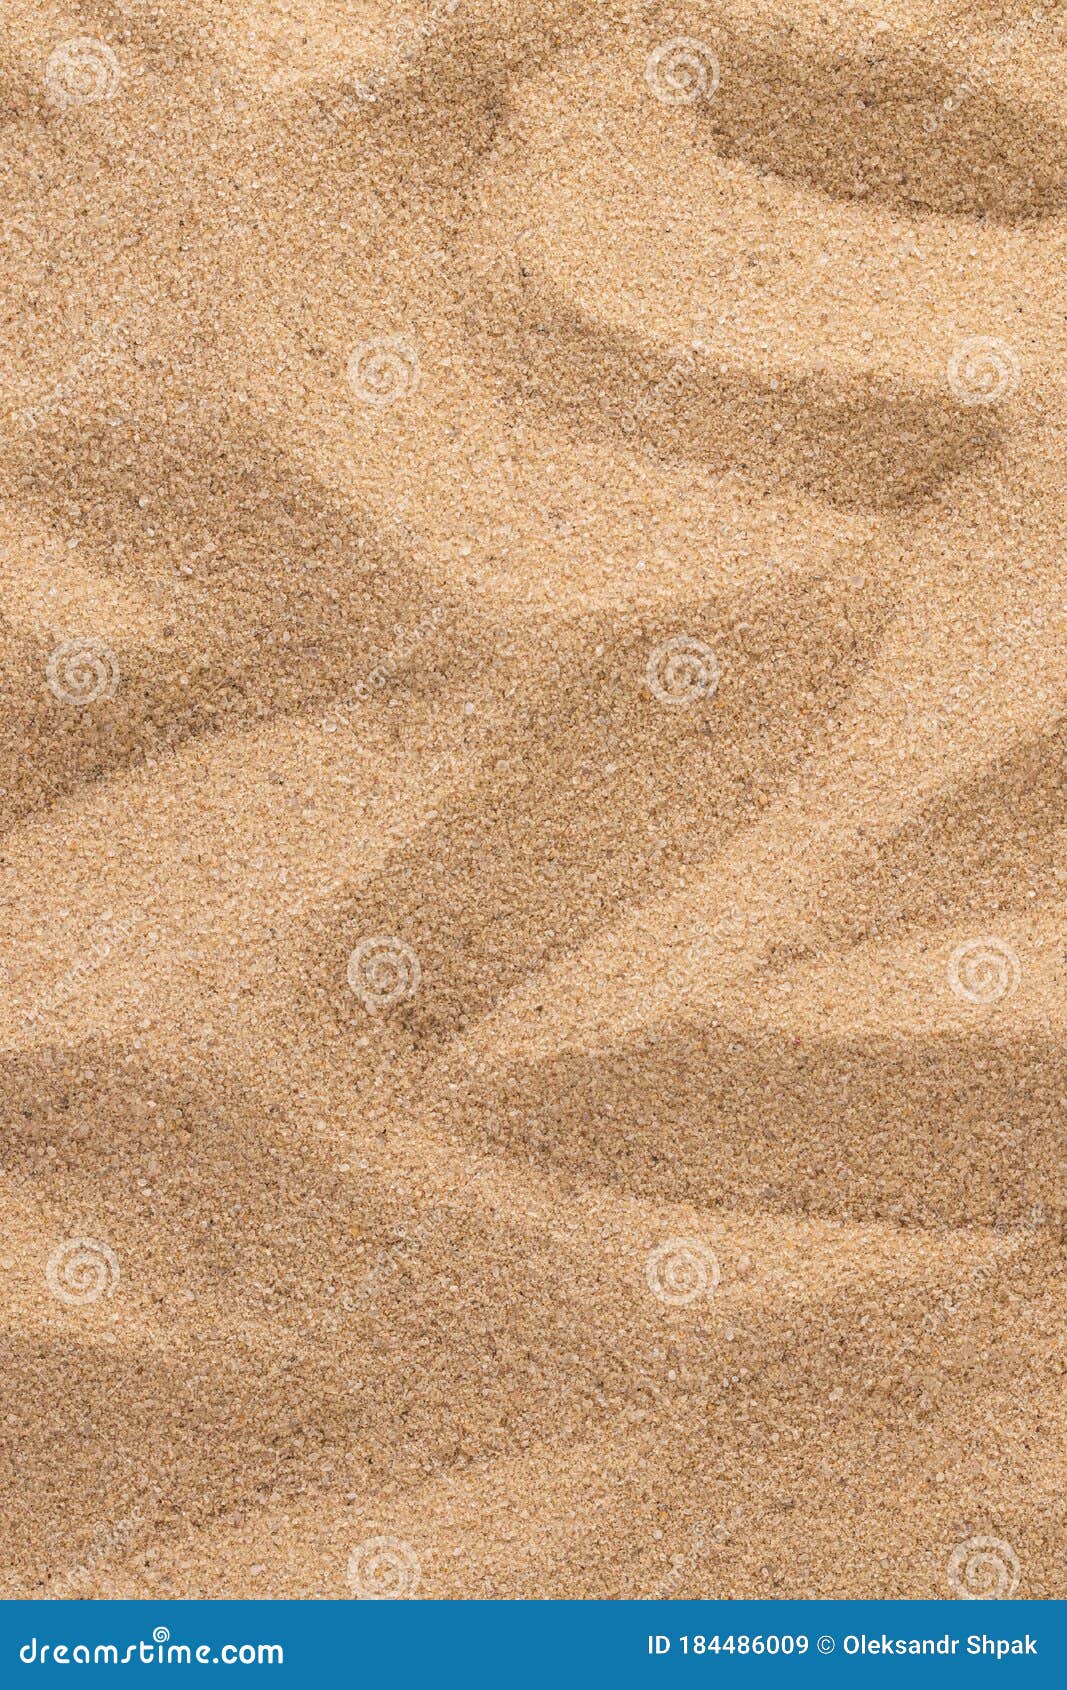 Sand Texture. Sandy Beach for Background Stock Image - Image of view ...